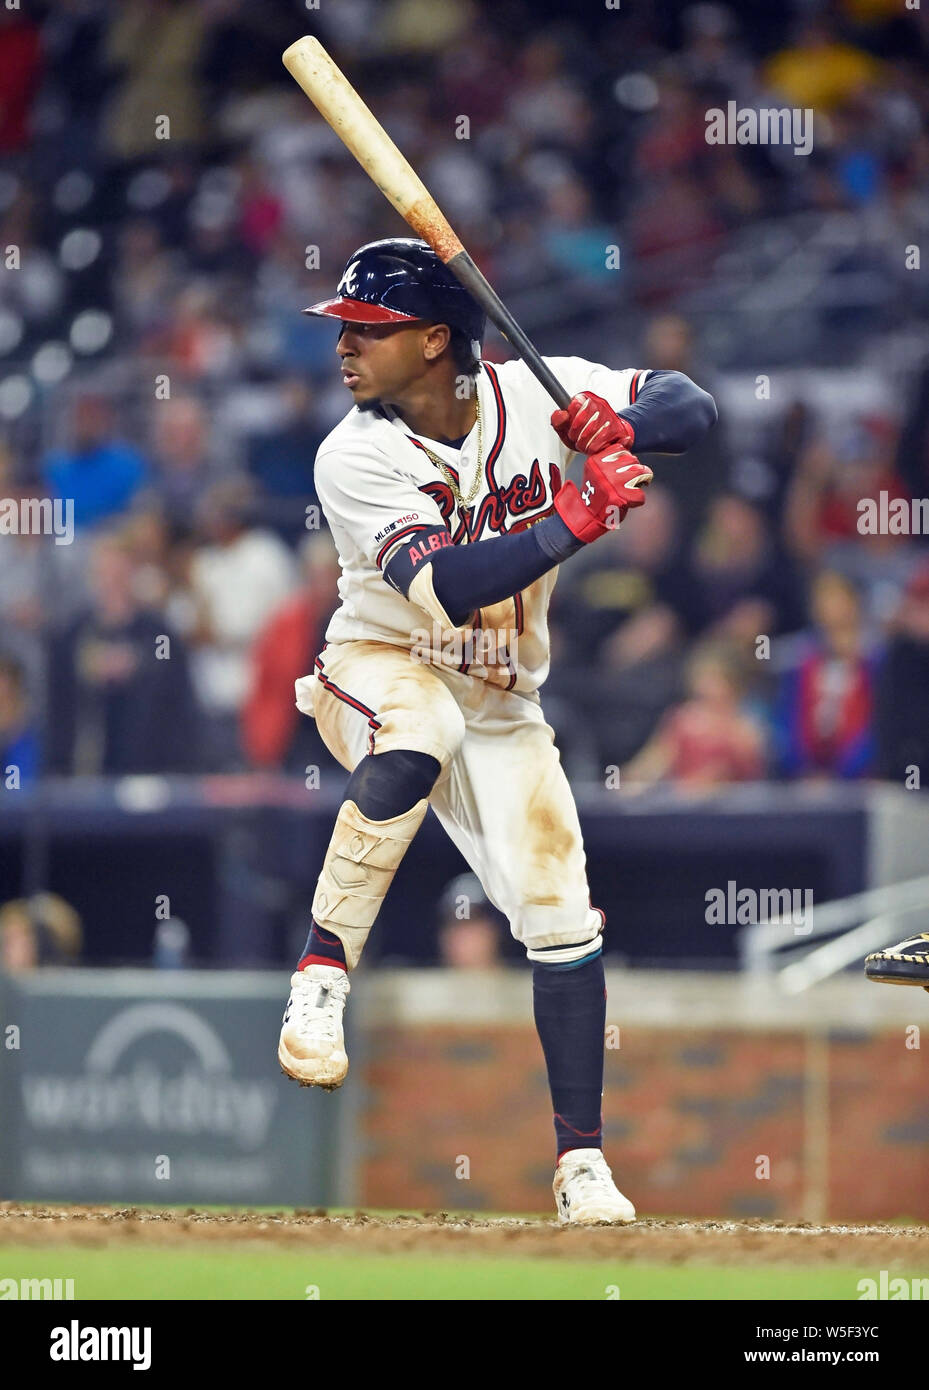 Ozzie Albies has been a big surprise for the Braves, but can his power  surge continue?